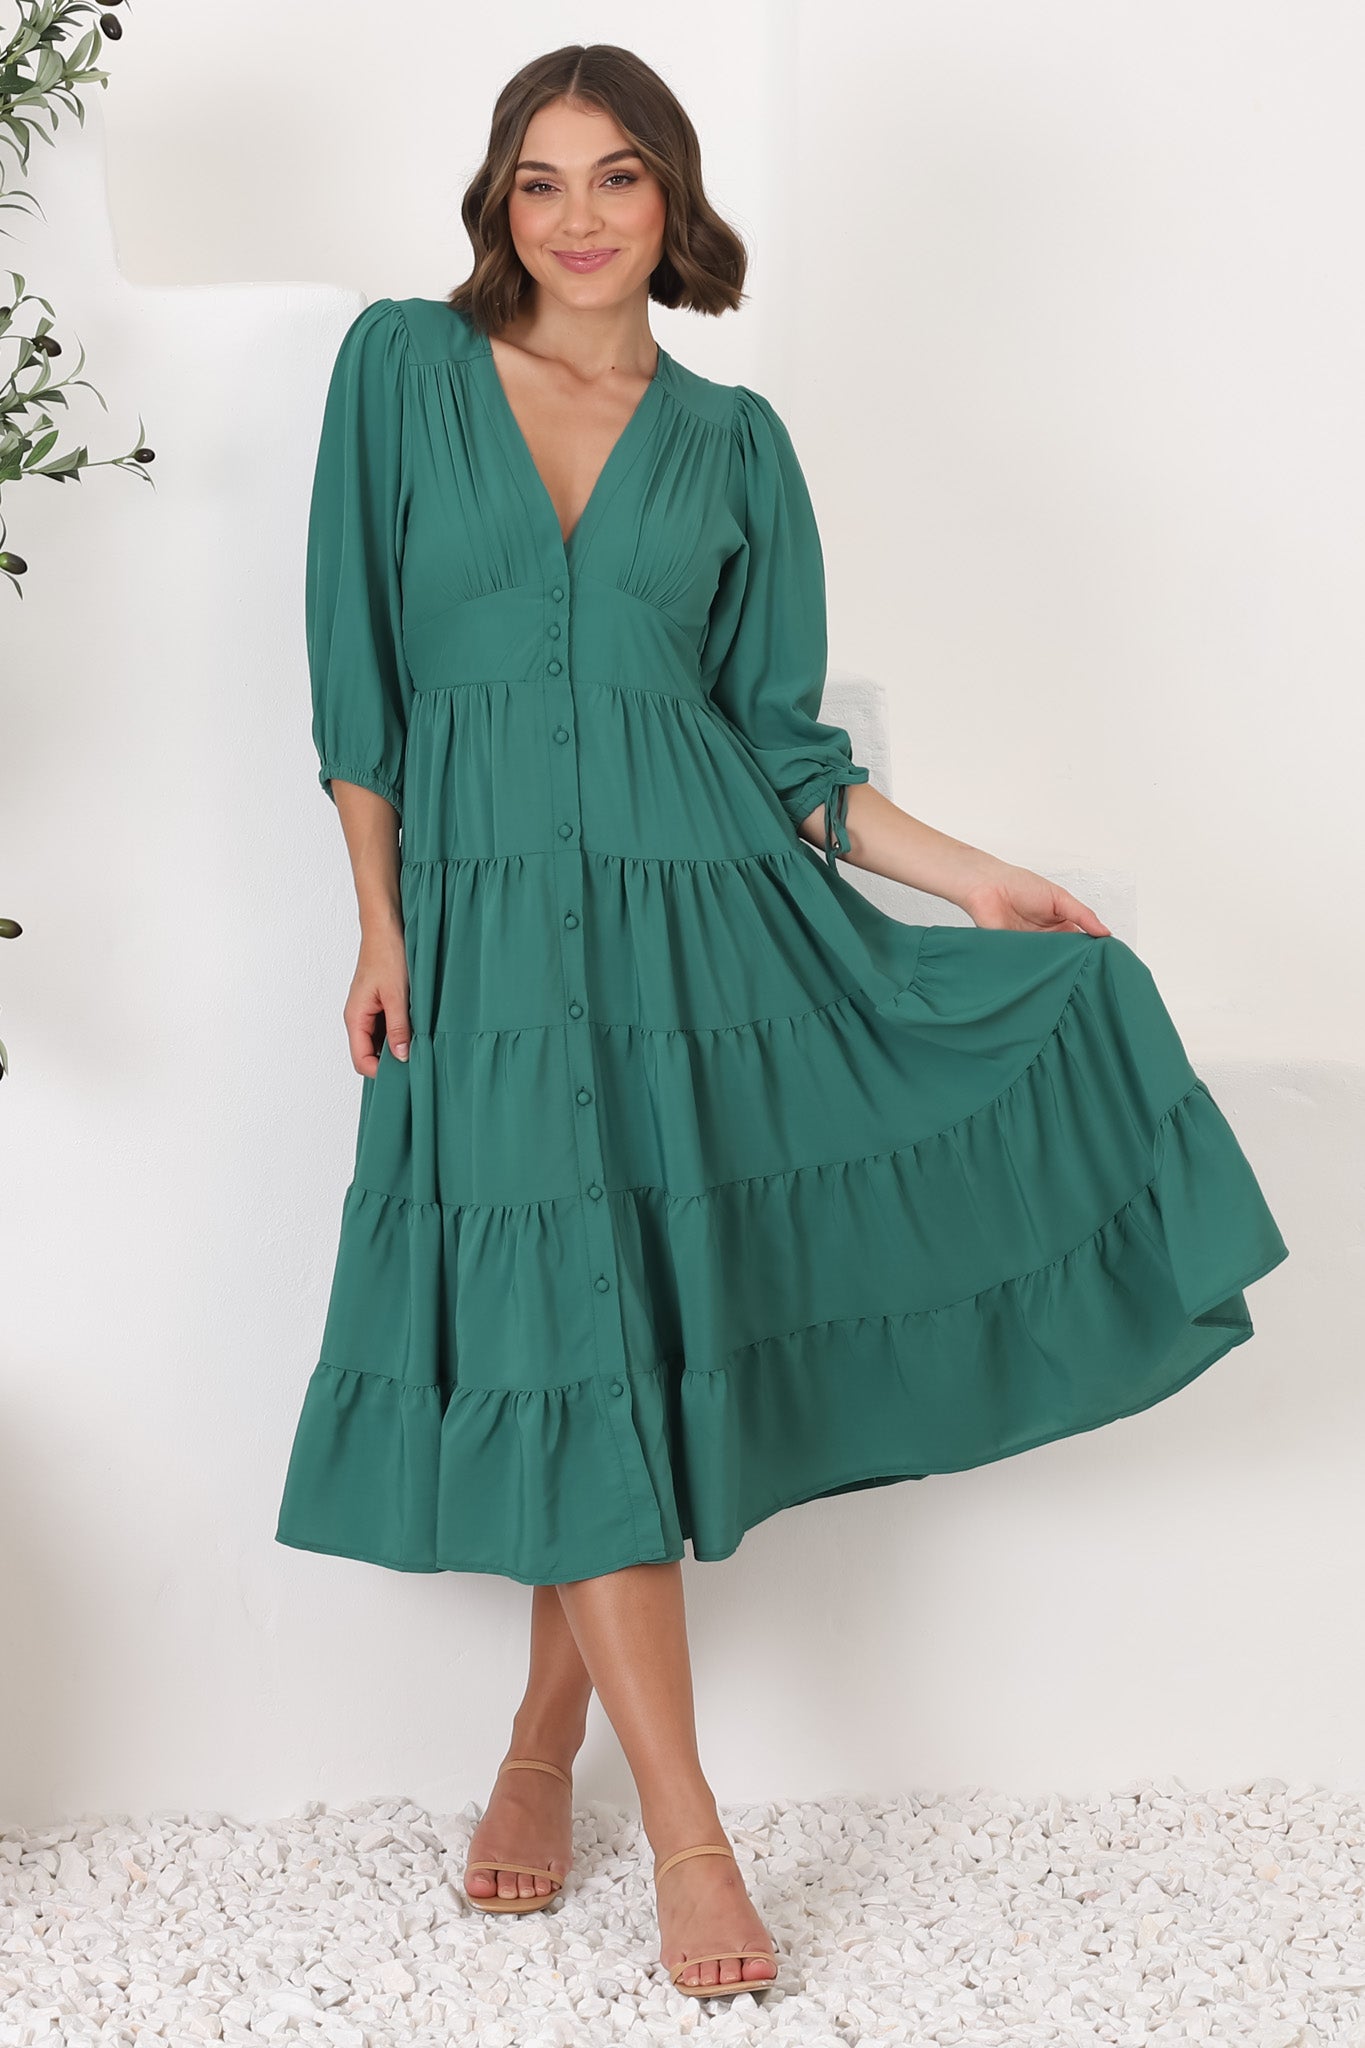 Milly Midi Dress - Tiered Button Down 3/4 Sleeve Dress in Green